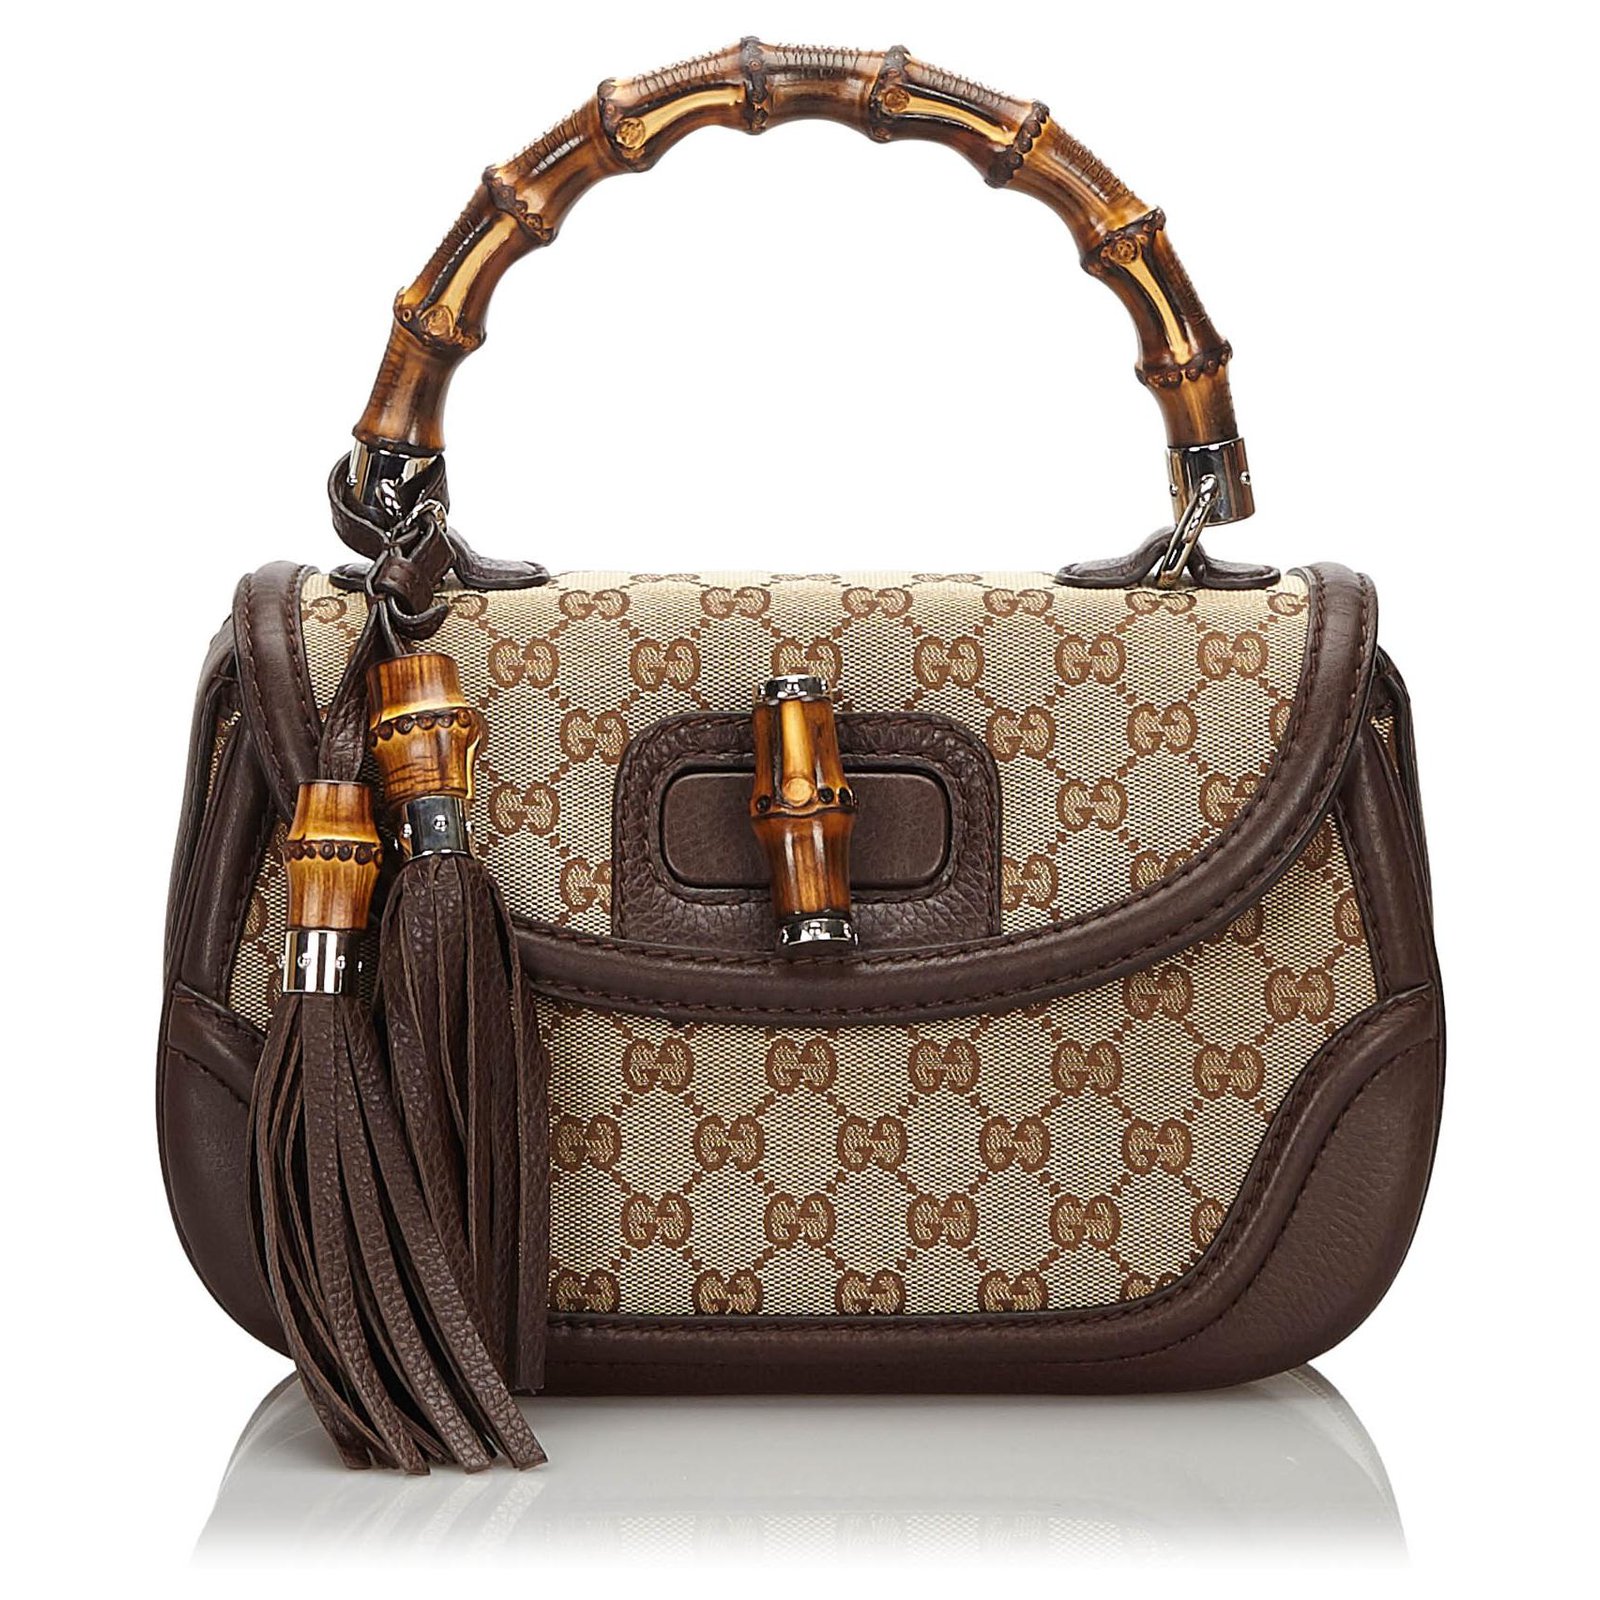 Diana bamboo leather crossbody bag Gucci Brown in Leather - 31563737